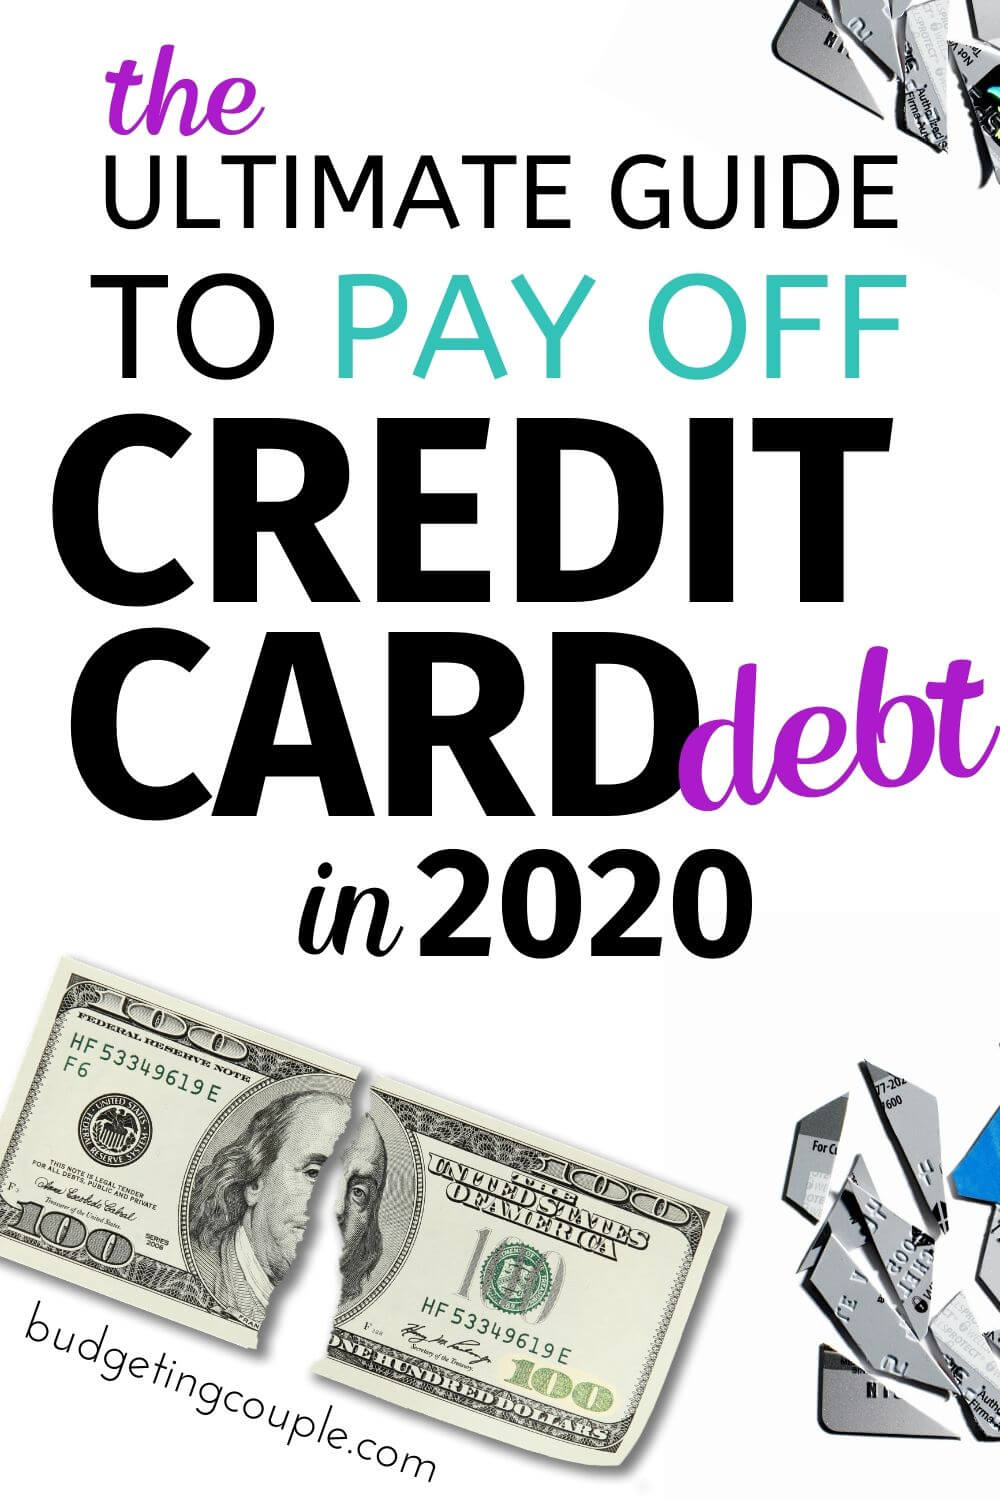 how-to-pay-off-credit-card-debt-step-by-step-budgeting-couple